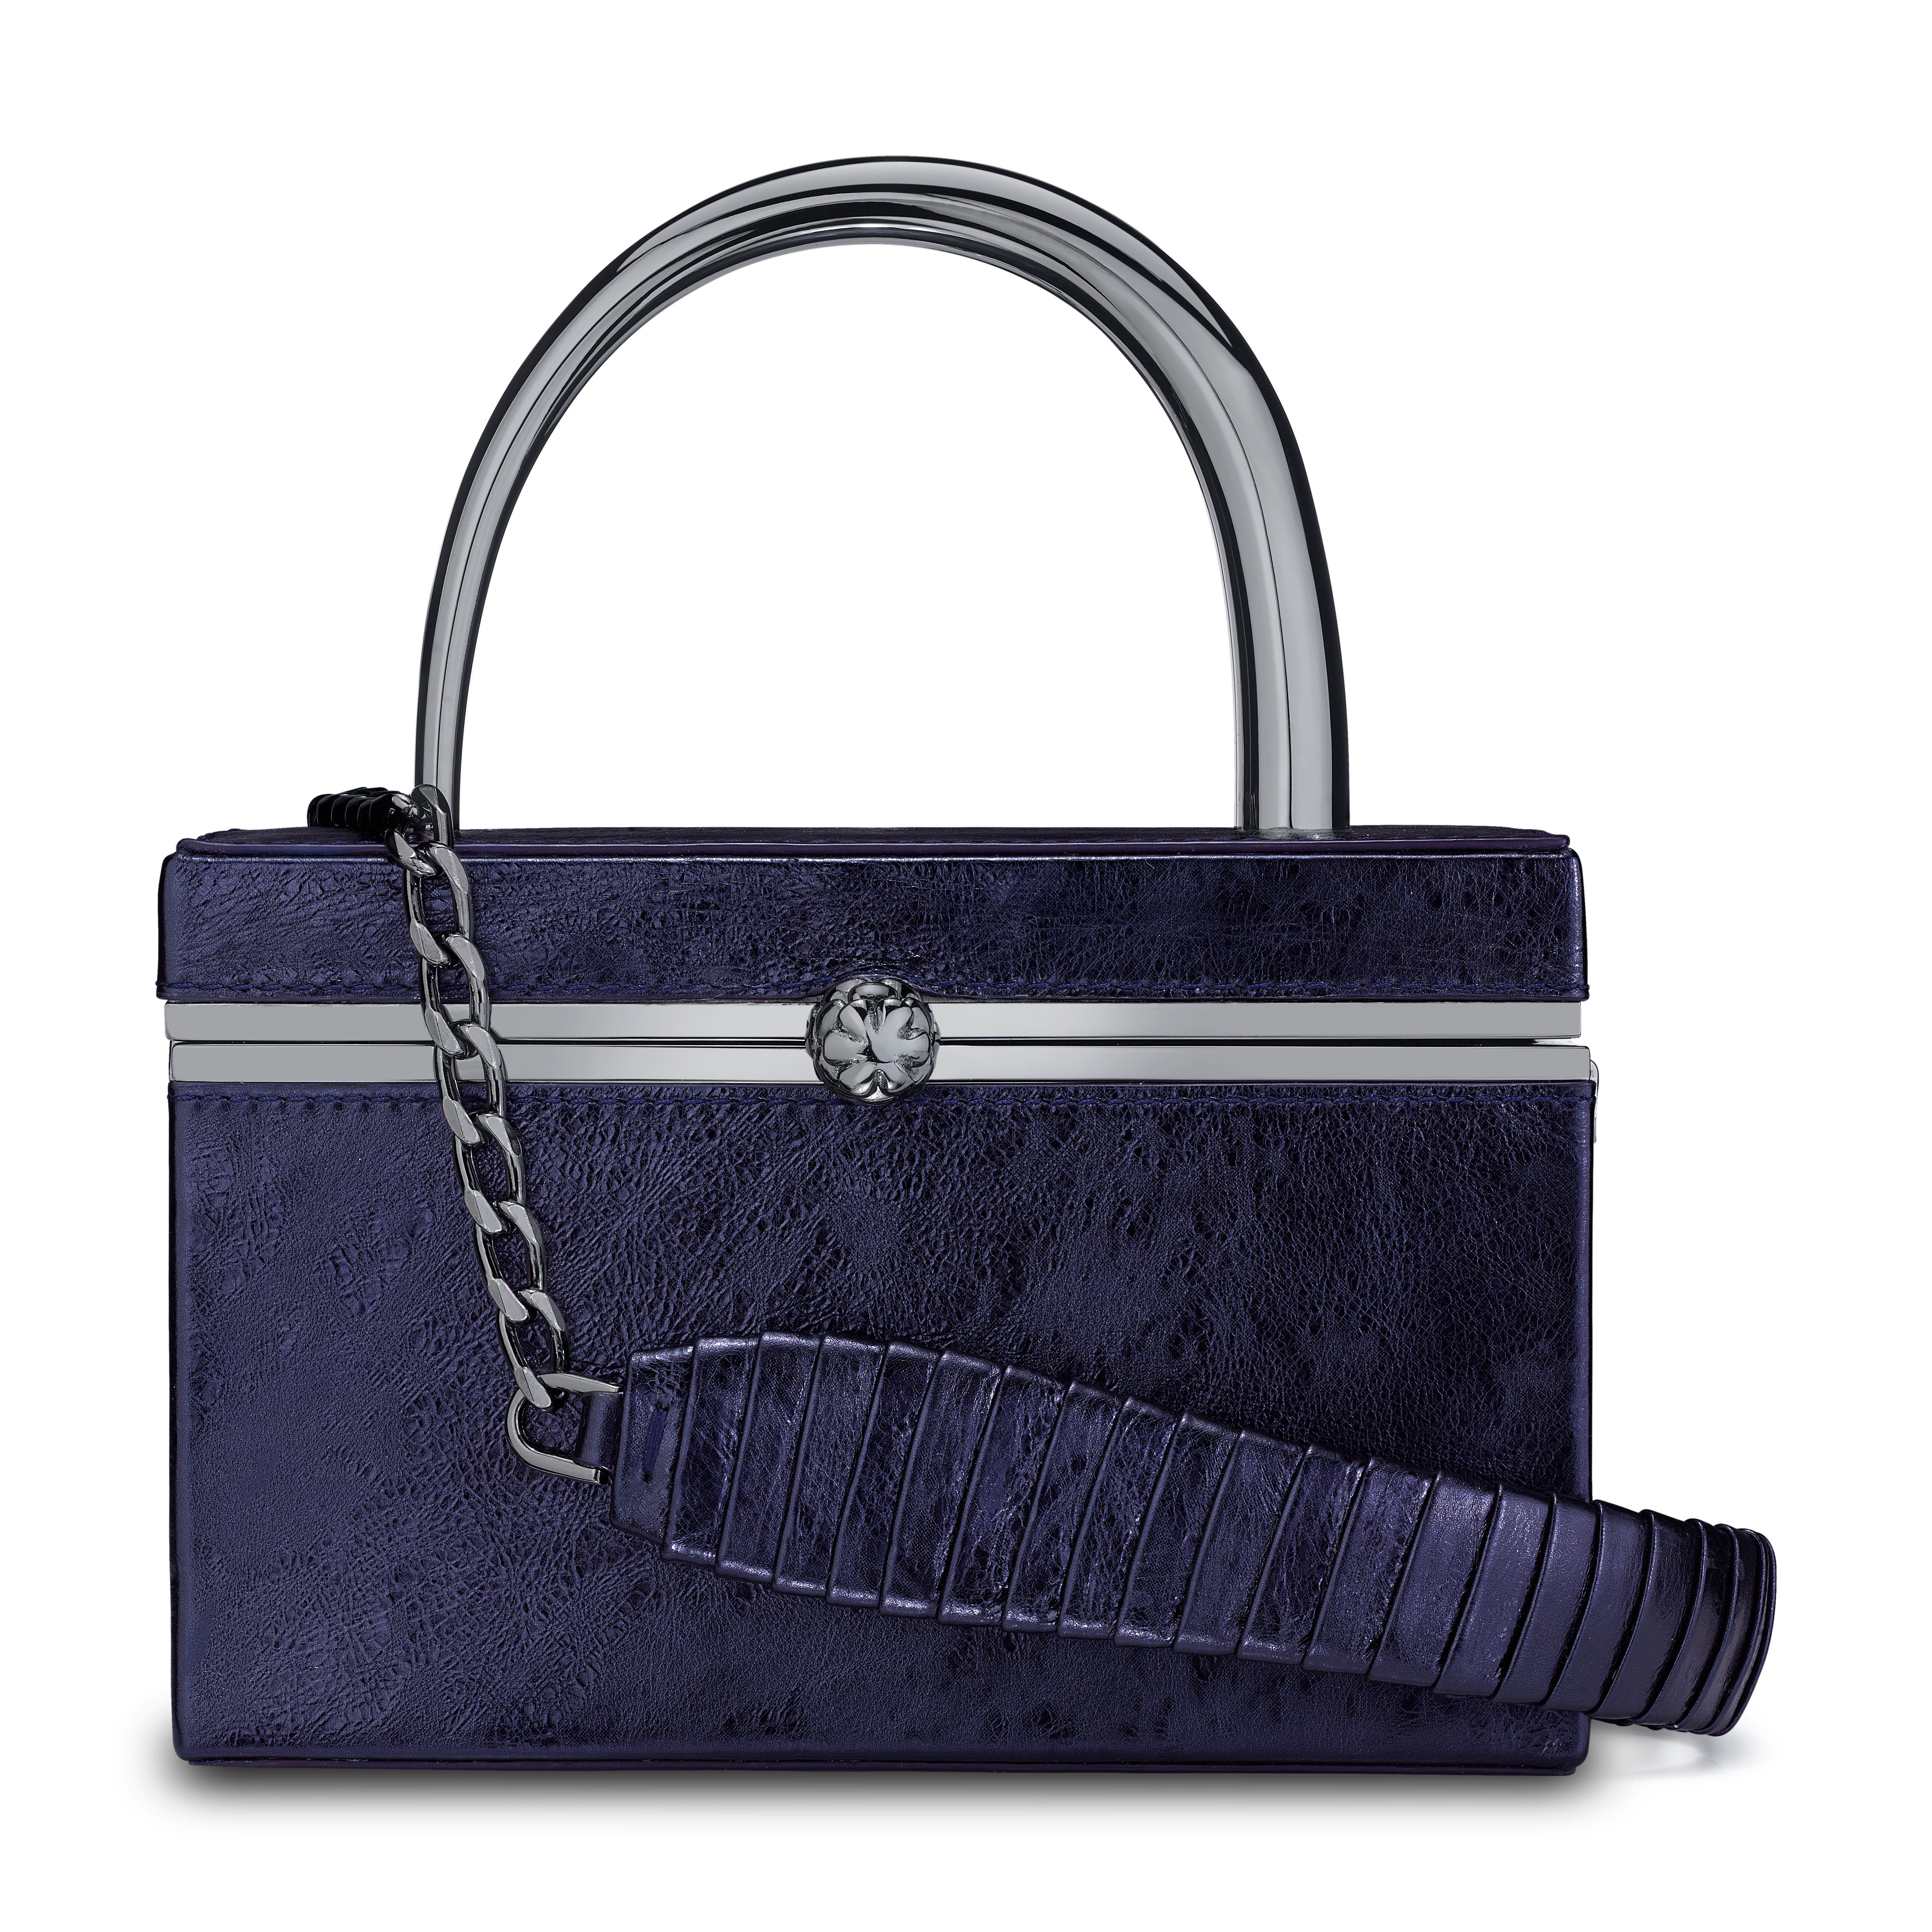 The Ava Box is featured in Sapphire Antiqued Leather with gunmetal hardware. The hard-framed rectangular box is designed with our custom horn-shaped metal handle and an optional cross-body chain with a matching leather wrapped accent. It fits the